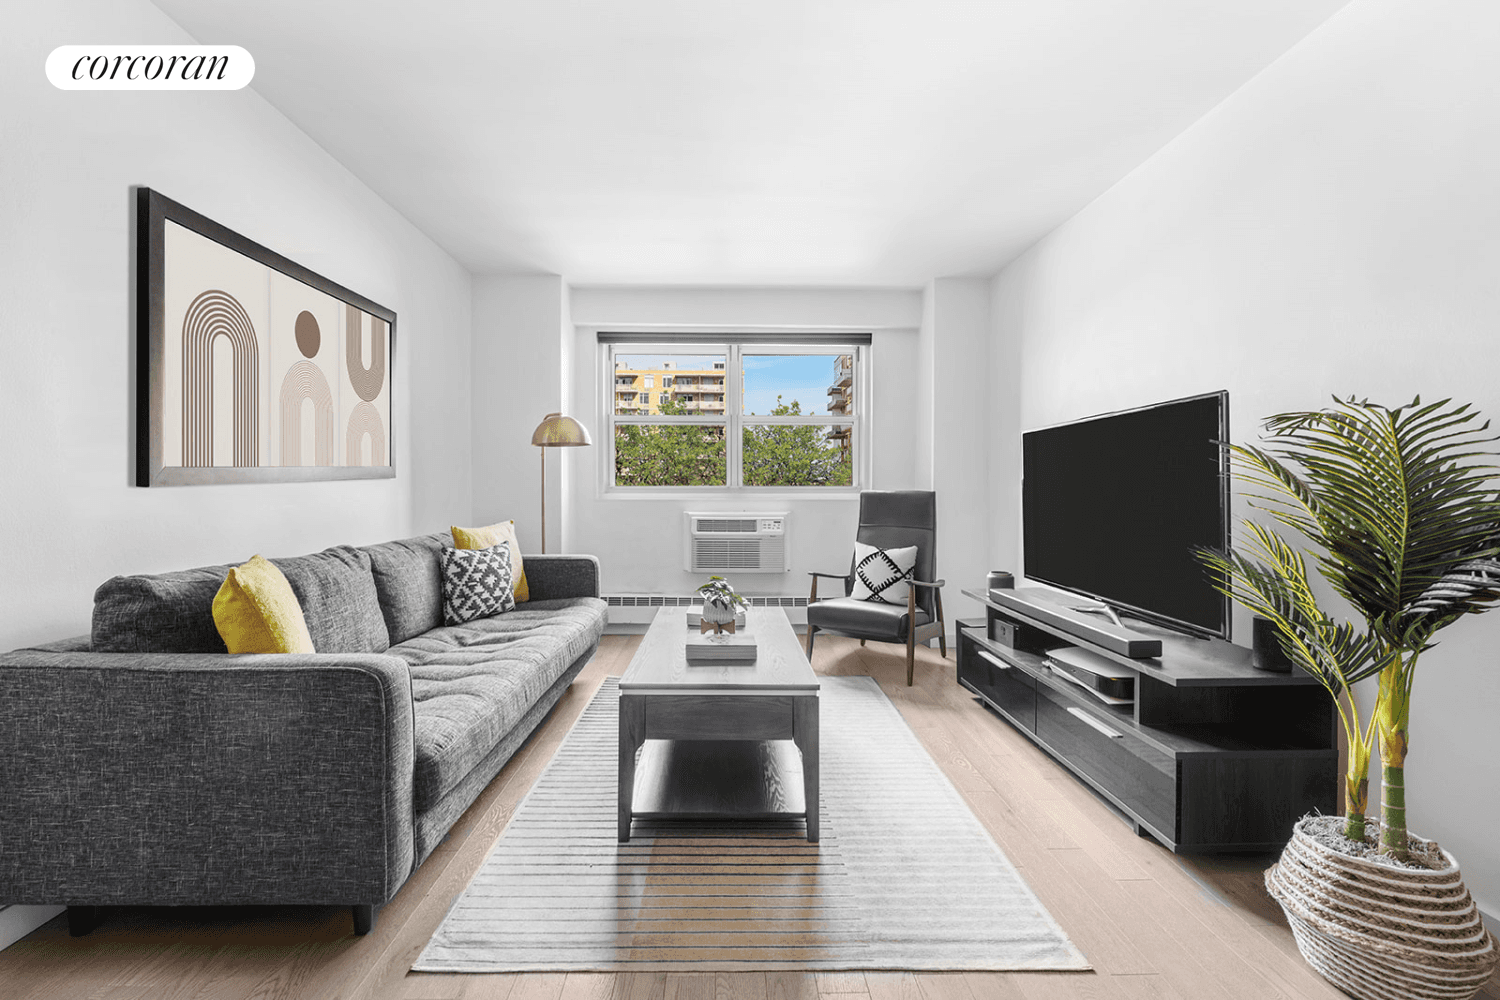 Introducing unit 7K at 175 Willoughby, a fully renovated one bedroom apartment that spans nearly 800 square feet in one of the most convenient locations in all of Brooklyn.